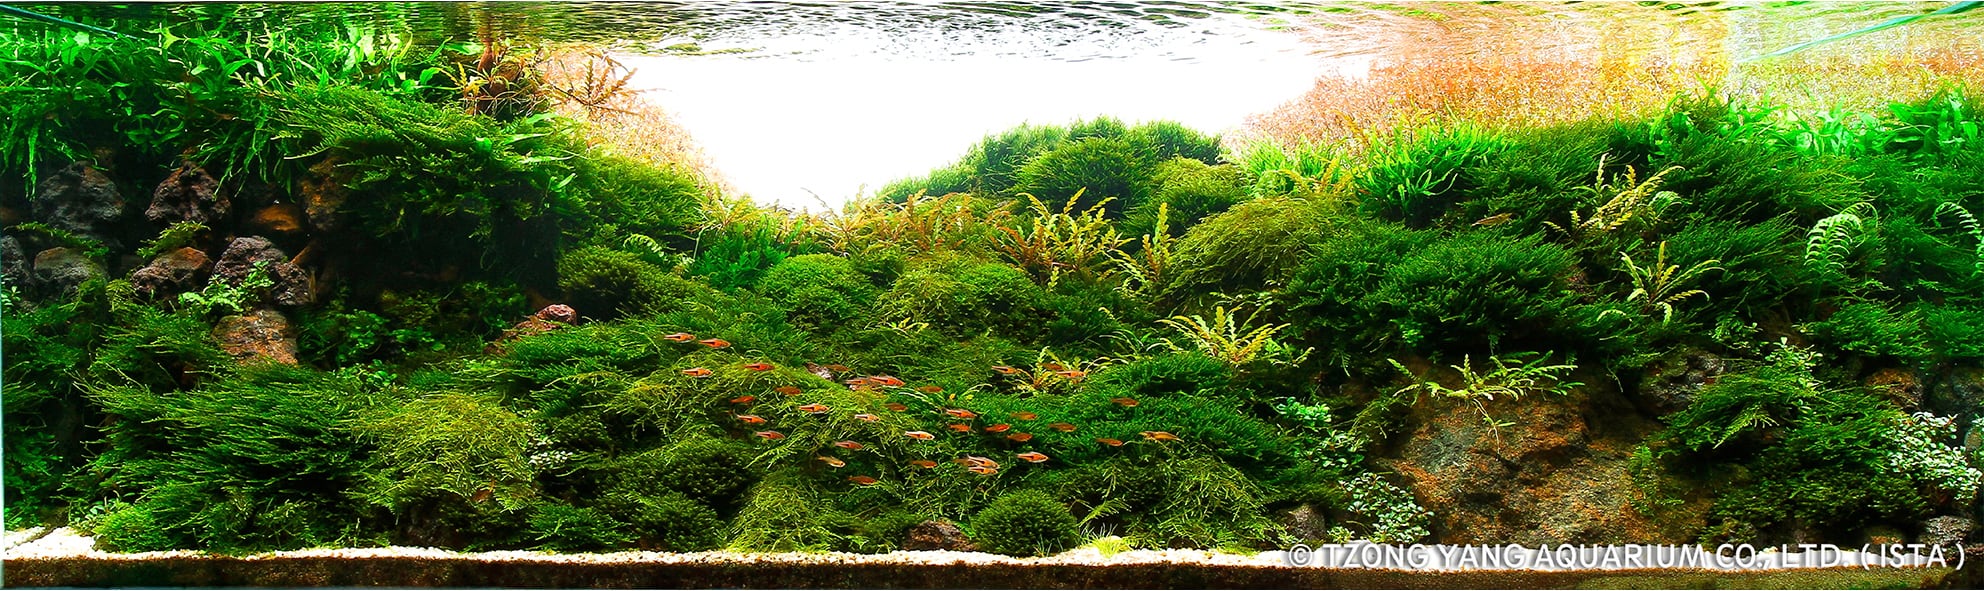 A Guide to Keeping and Growing Aquatic Moss - Aquascaping Love Moss On Rocks In Aquarium